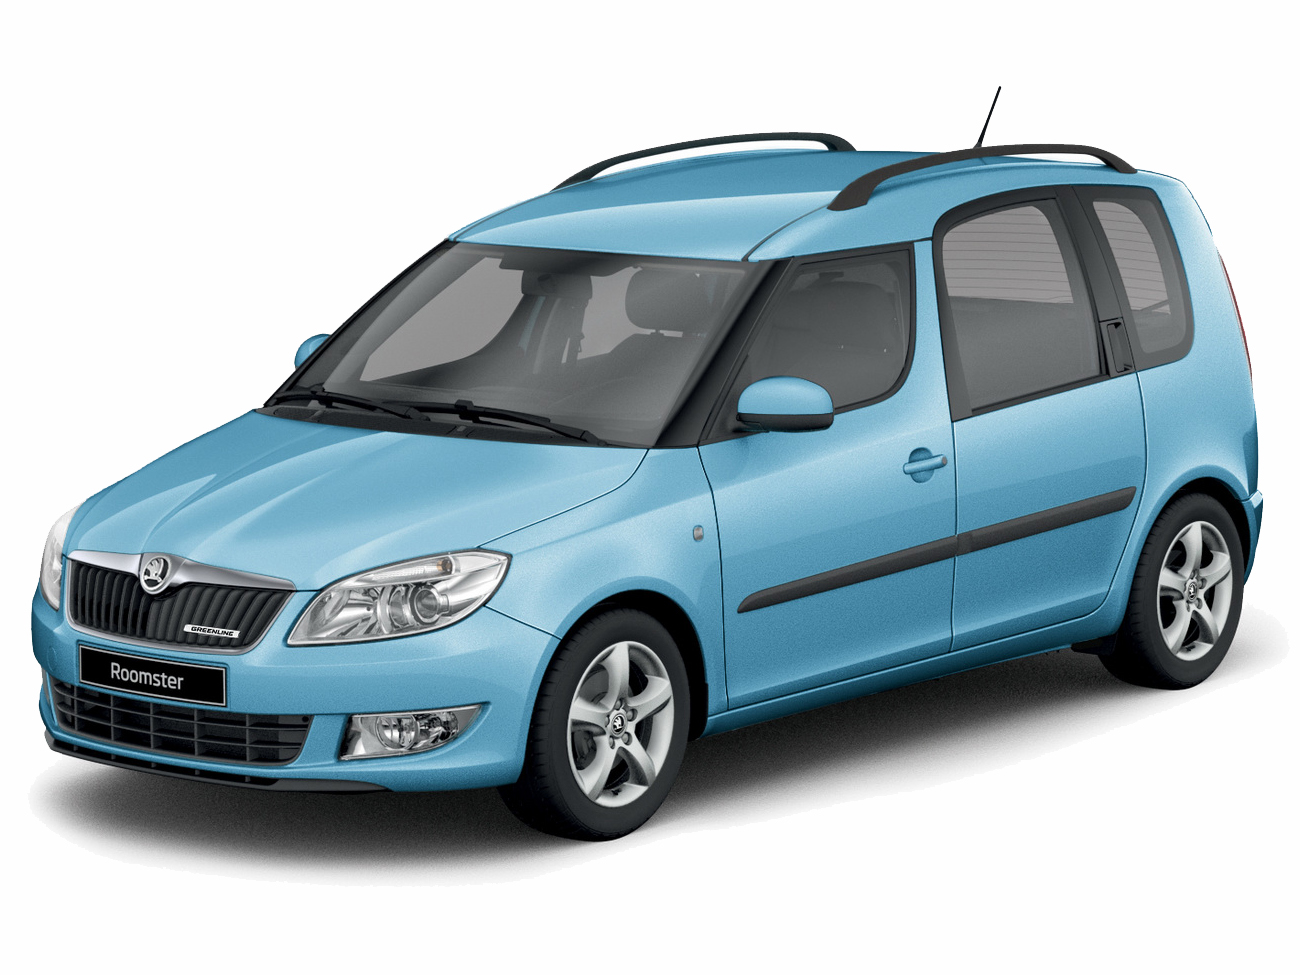 roomster review, Skoda Roomster (2006-2015)